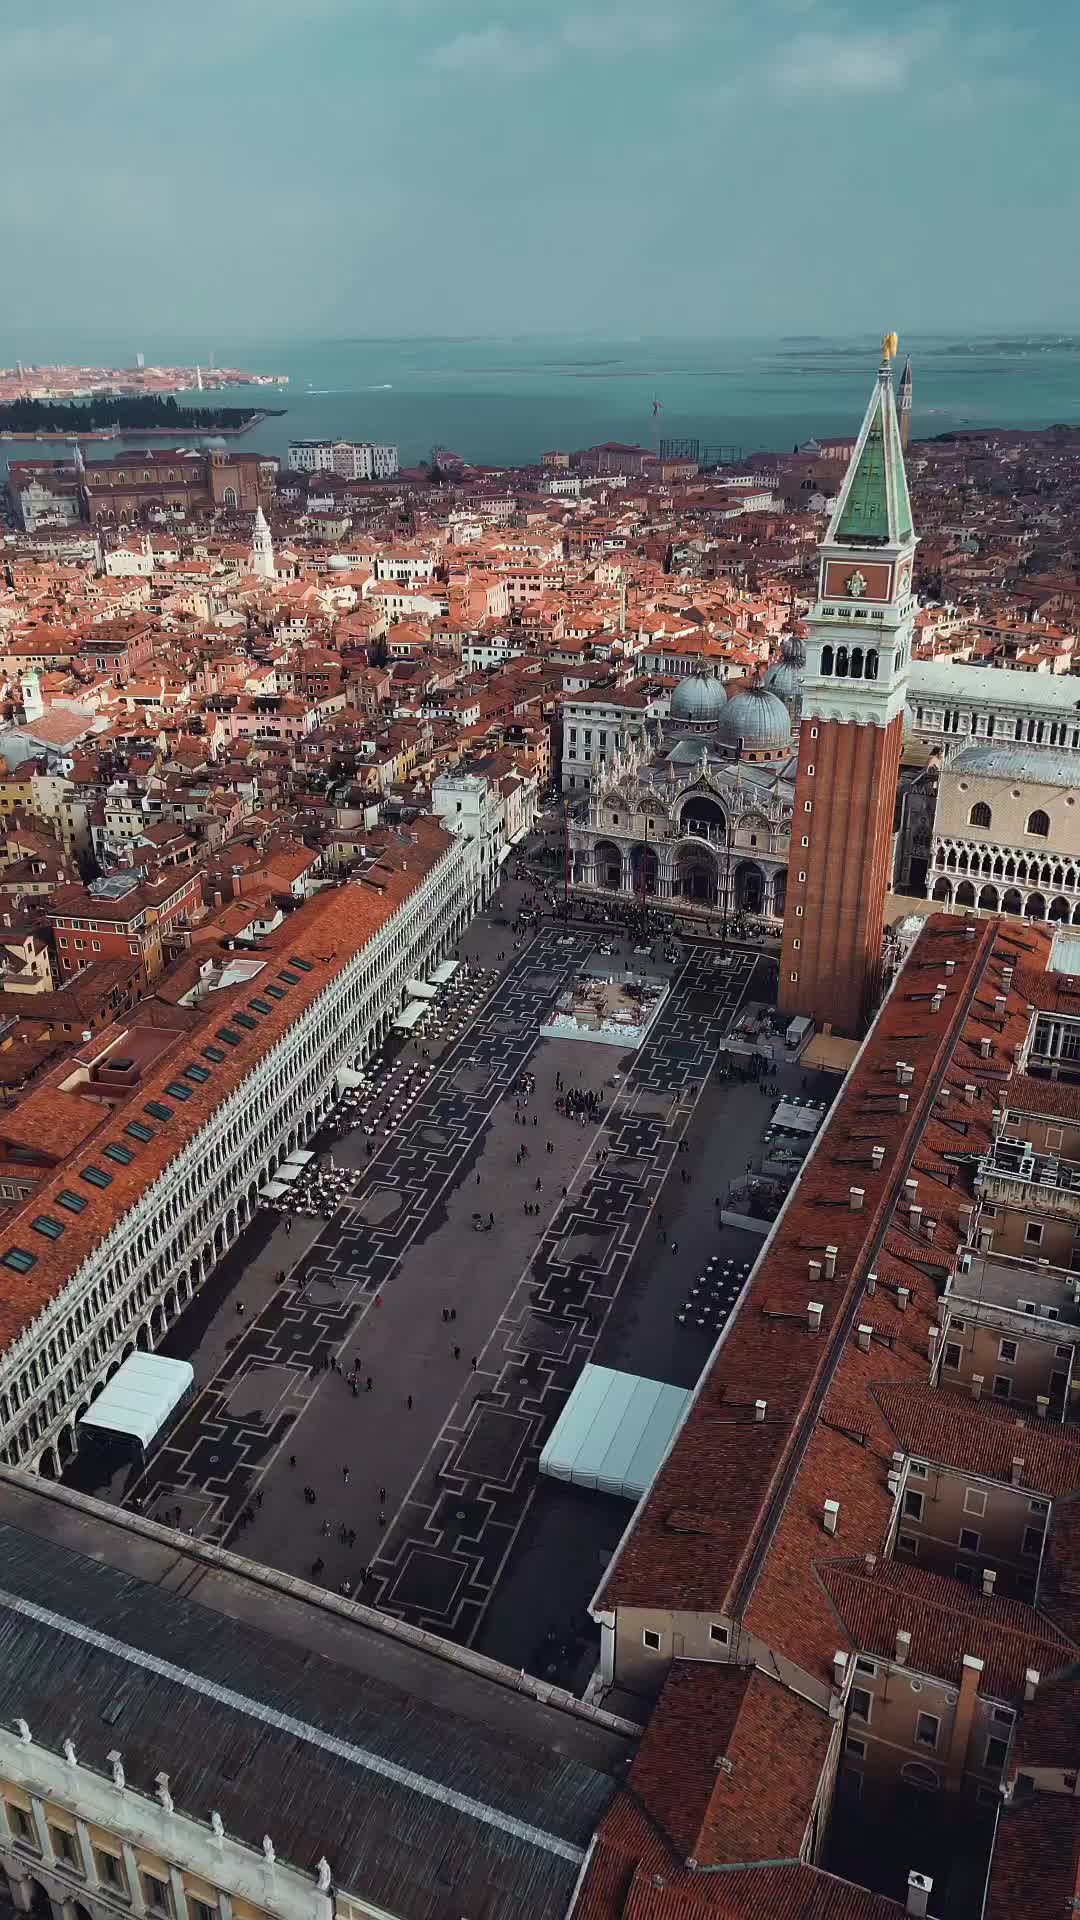 Piazza San Marco in Venice - A Must-See Landmark